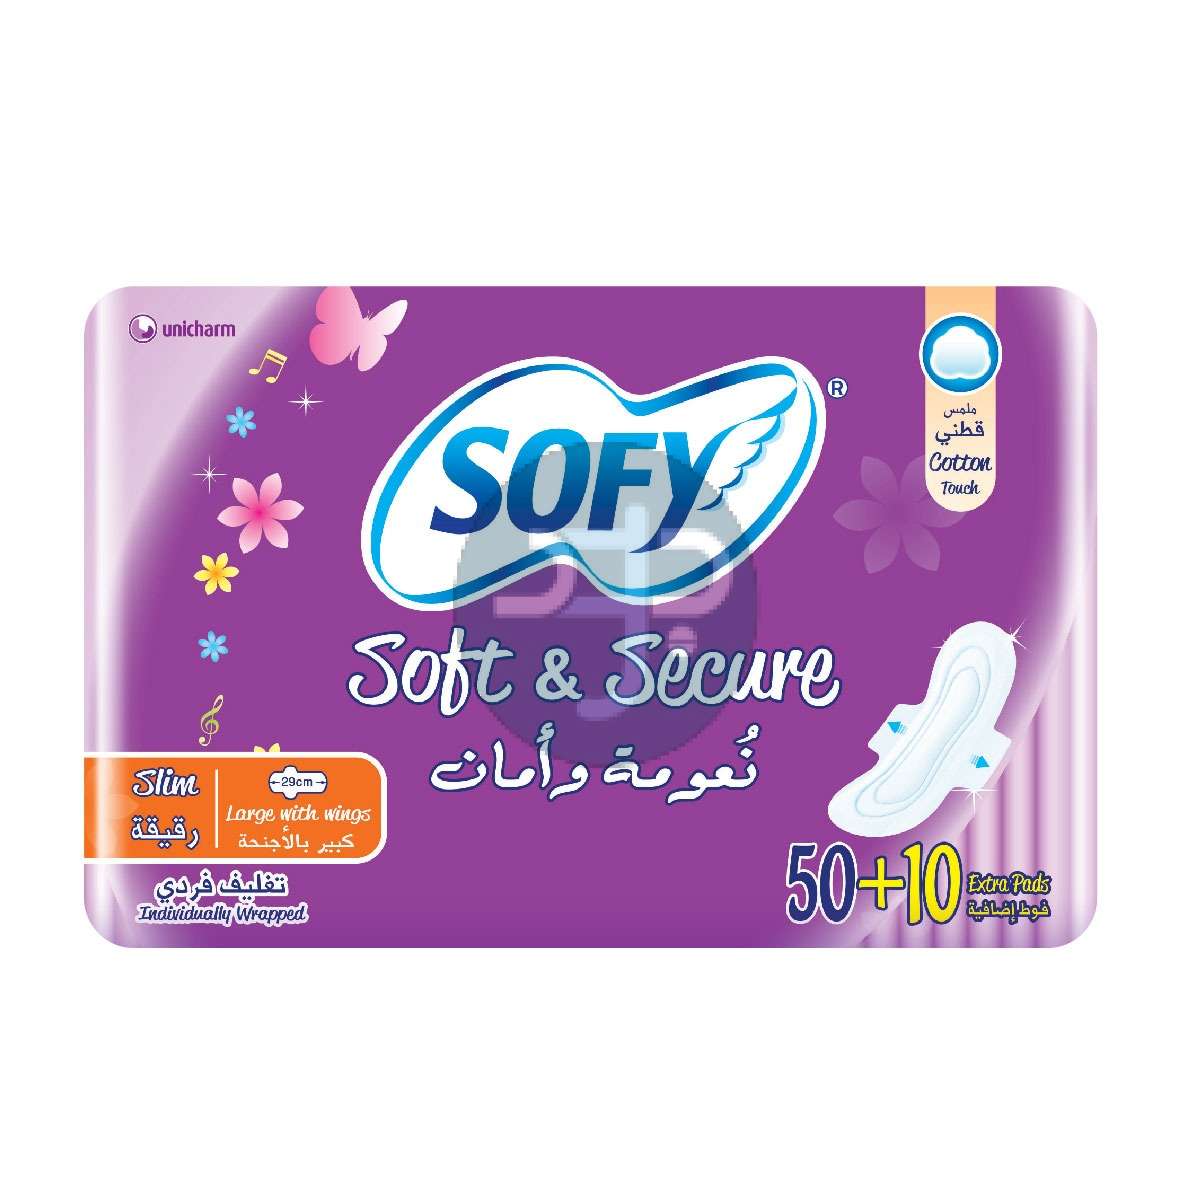 Product-SOFY Soft & Secure Sanitary Pads with Wings, Slim, Large 29 cm, Pack of 60 Pads (50+10 Free)